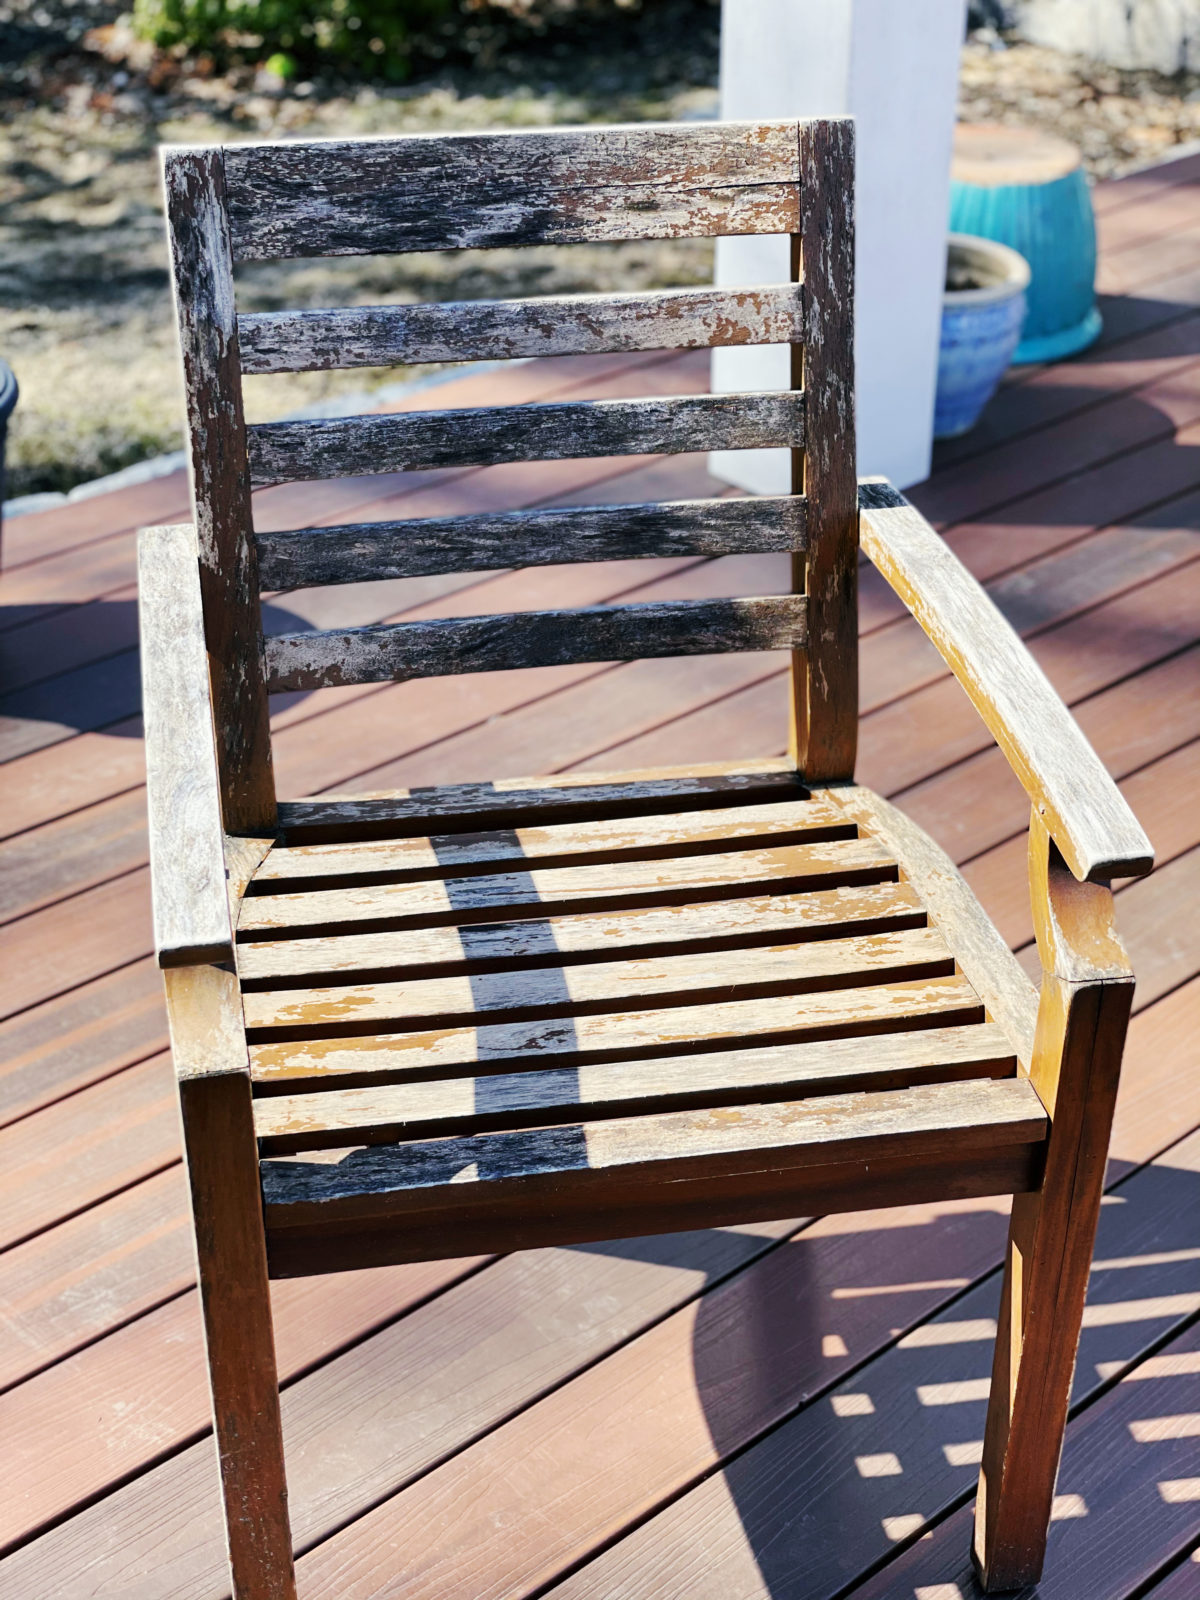 How to Paint Outdoor Wood Furniture | whitneysowles.com